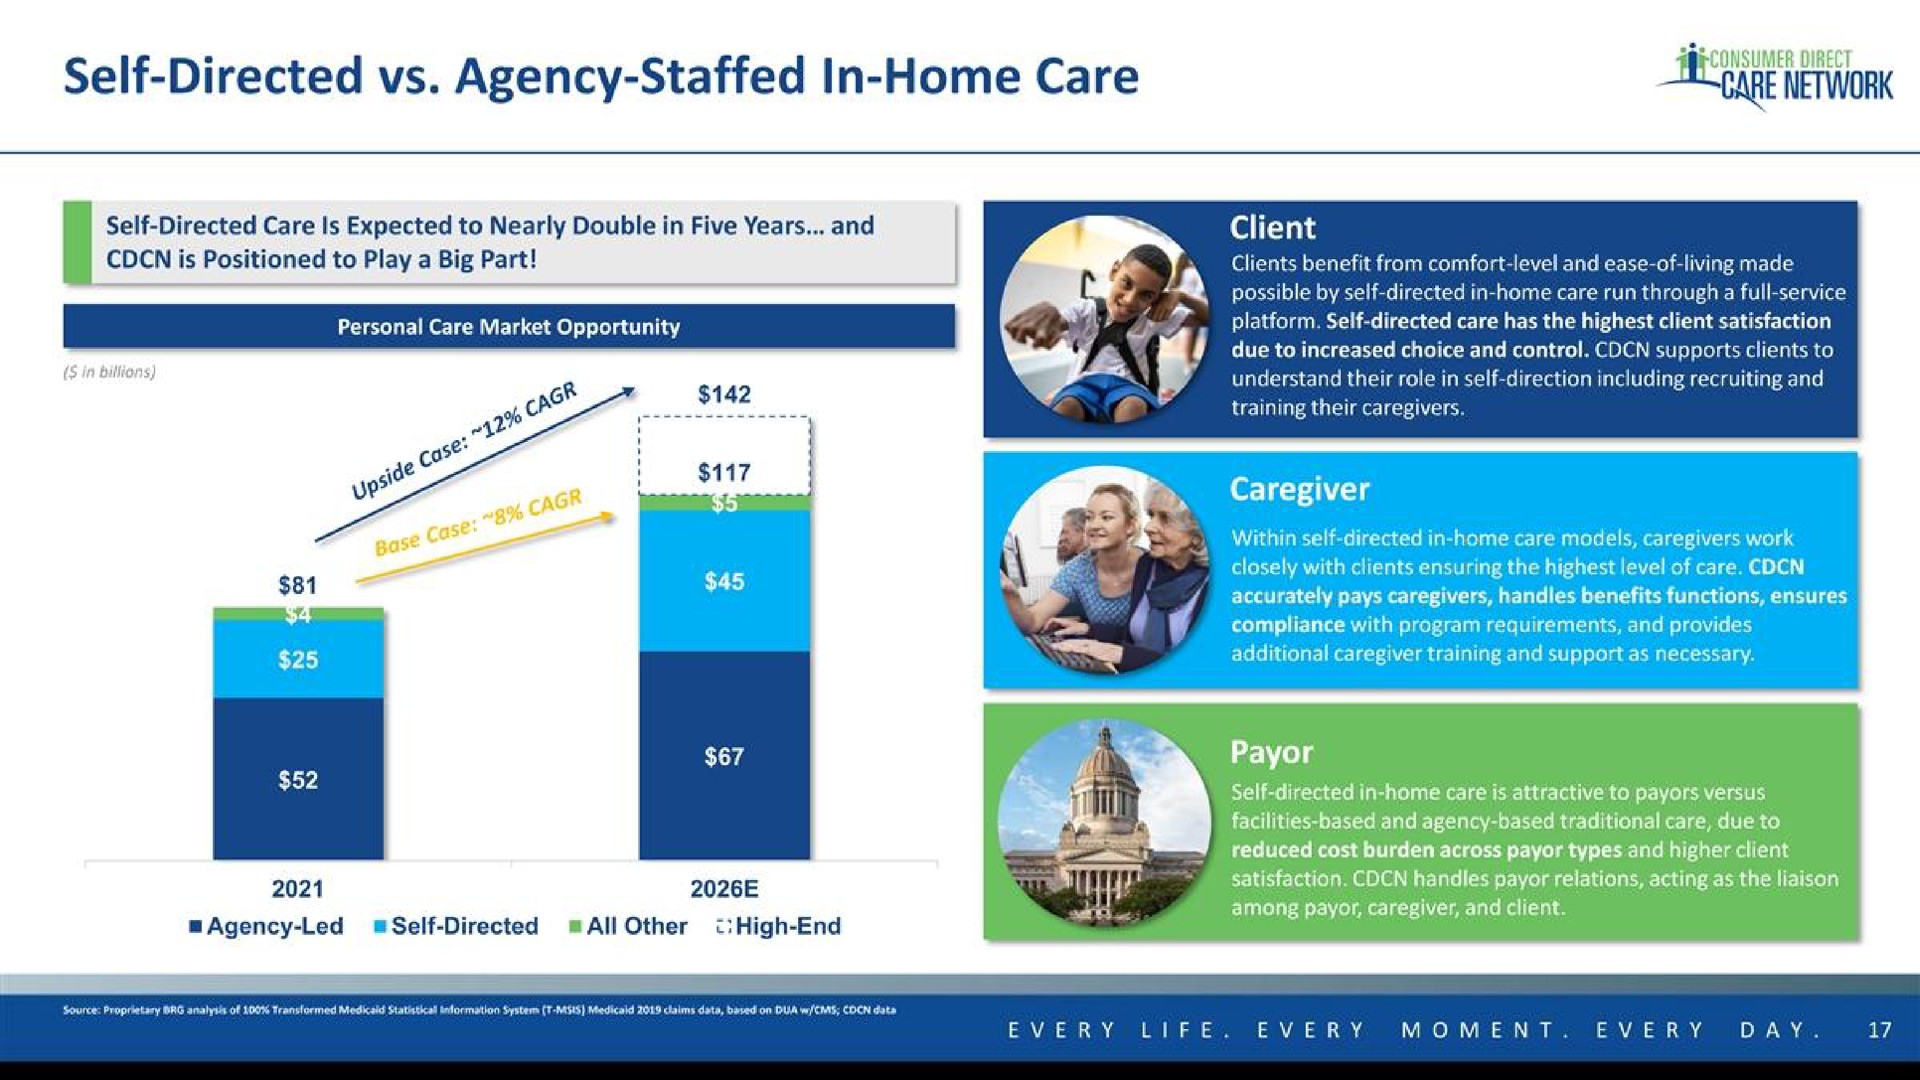 self directed agency staffed in home care care network | Consumer Direct Care Network